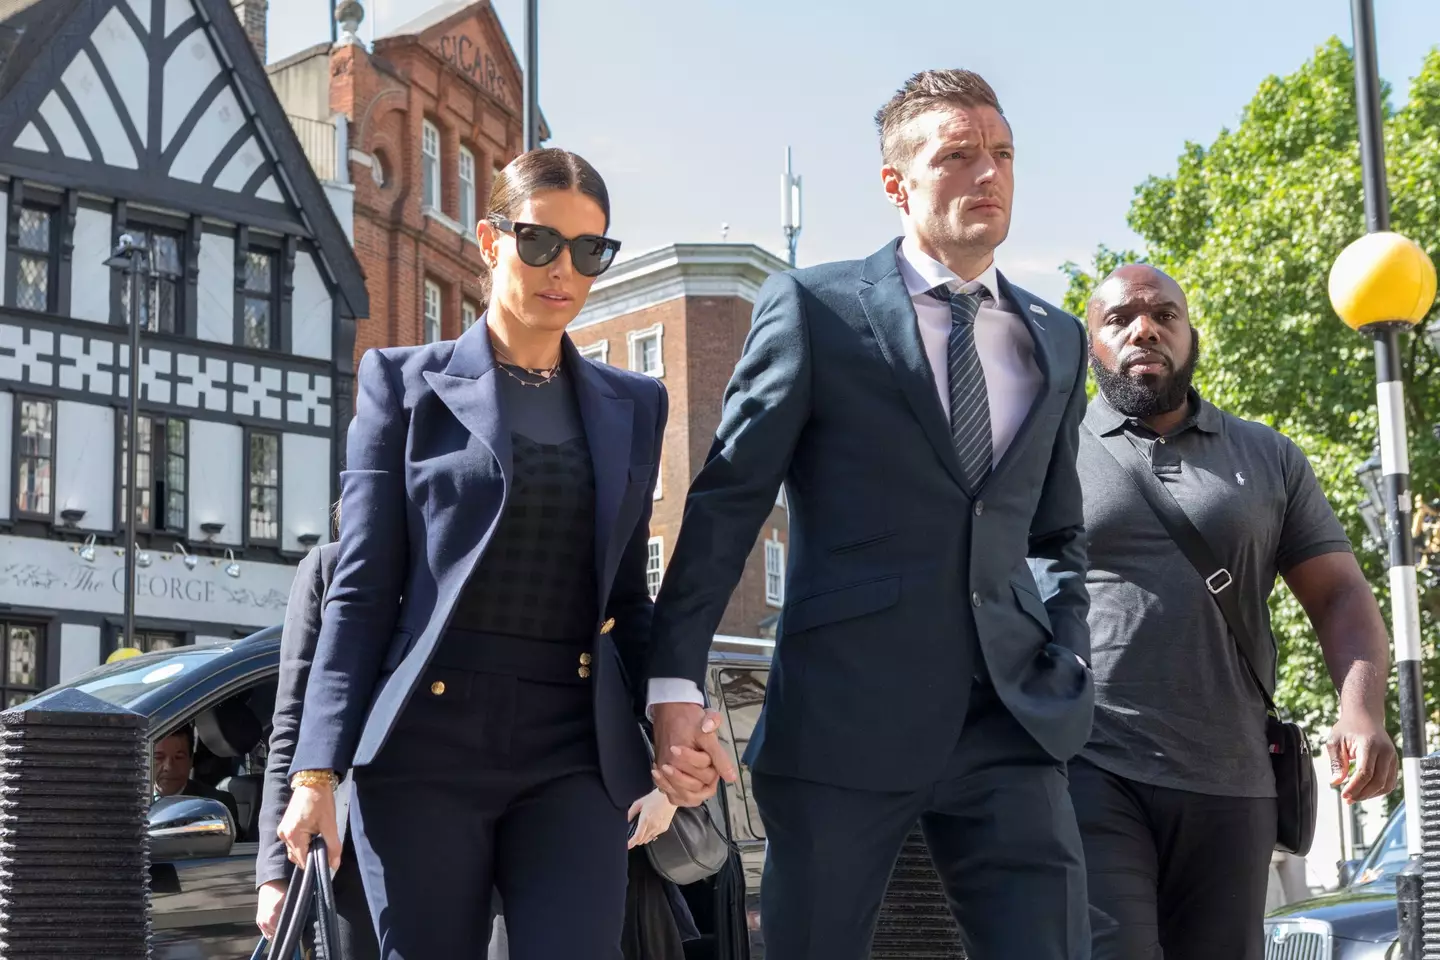 Rebekah Vardy and husband Jamie arriving at court.